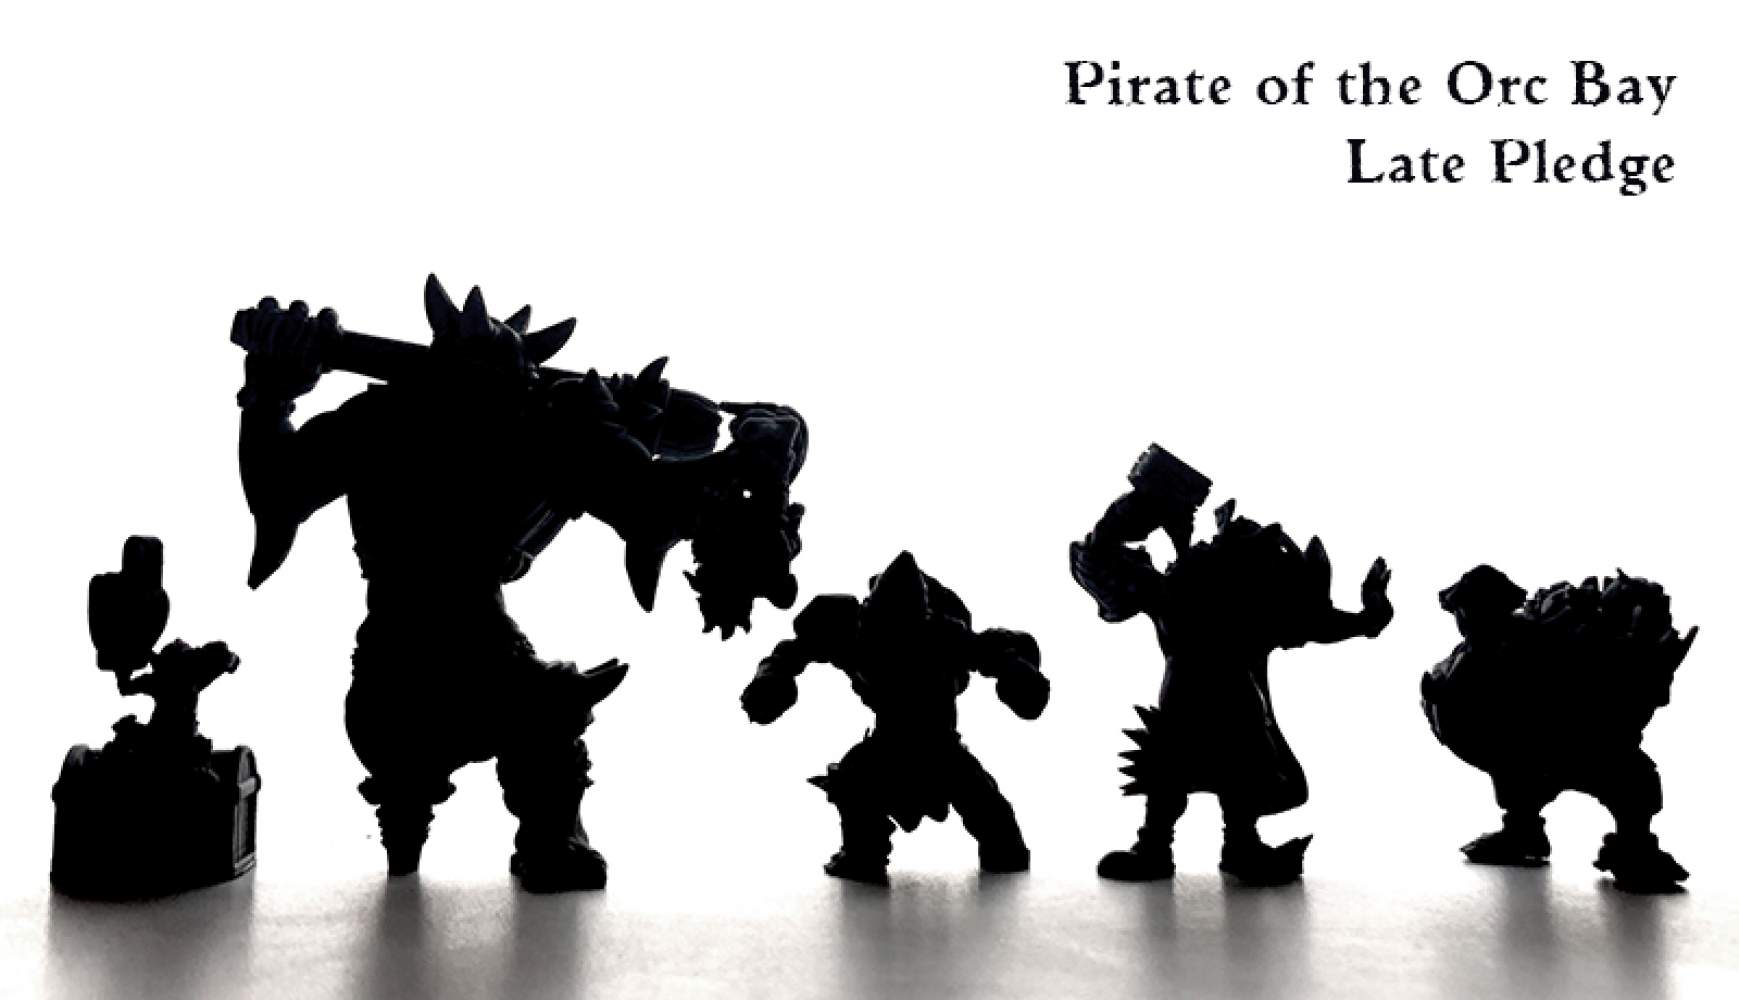 Pirate of the Orc Bay - Late Pledge